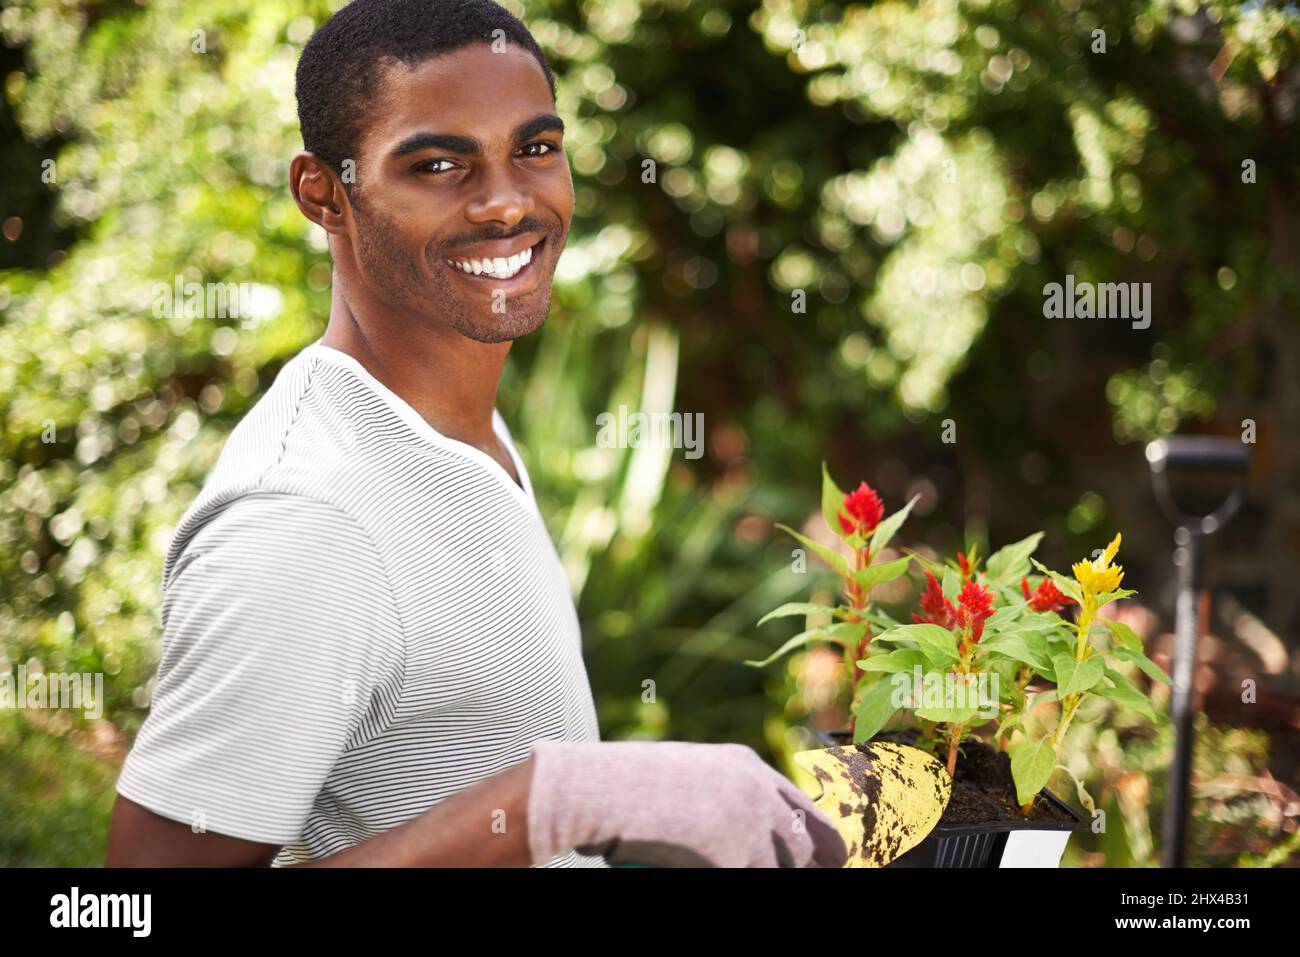 Indulging his green thumb. Portrait of a handsome young man gardening. Stock Photo